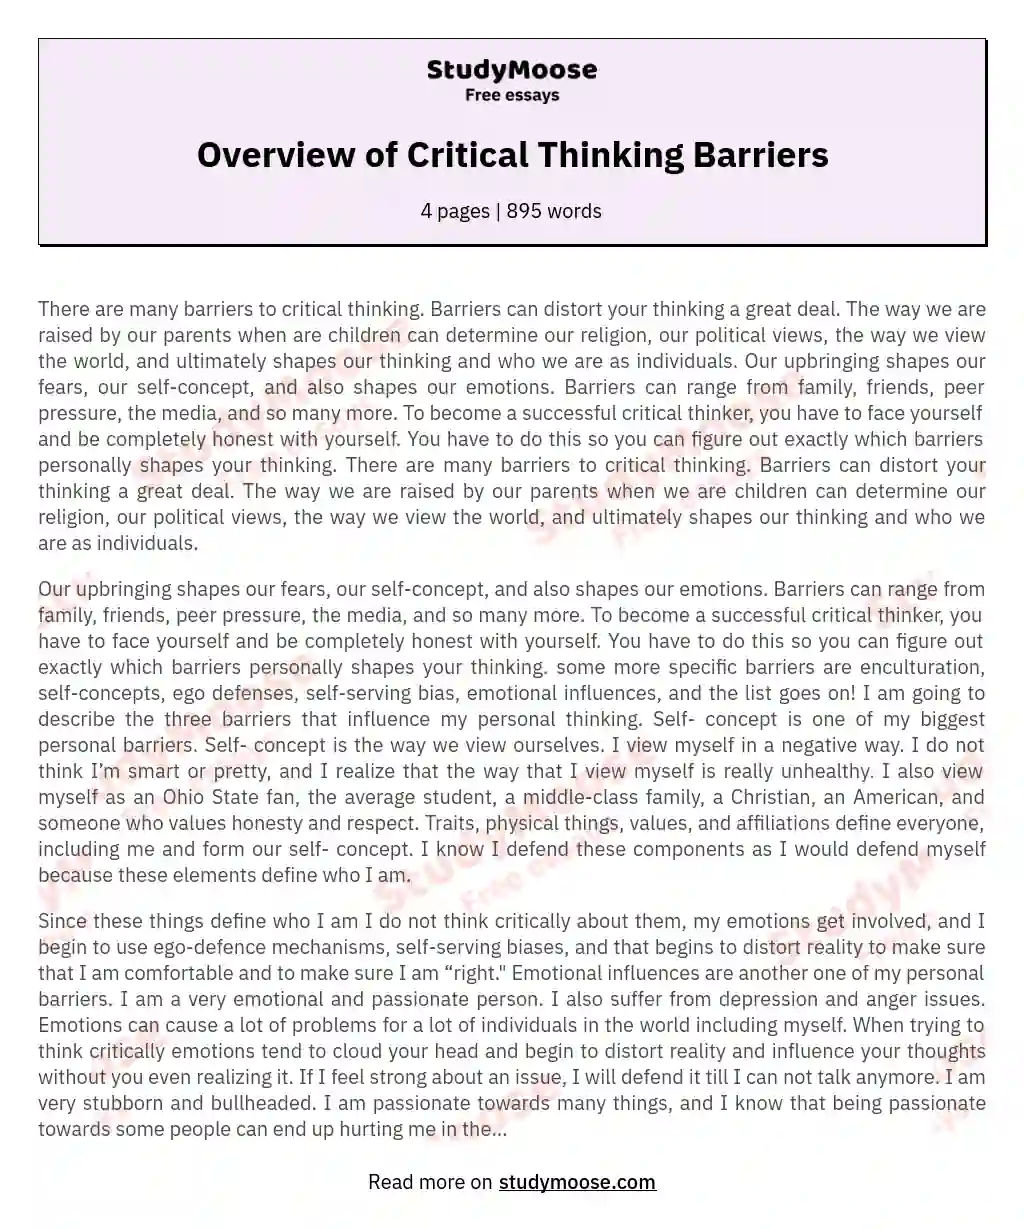 Overview of Critical Thinking Barriers essay